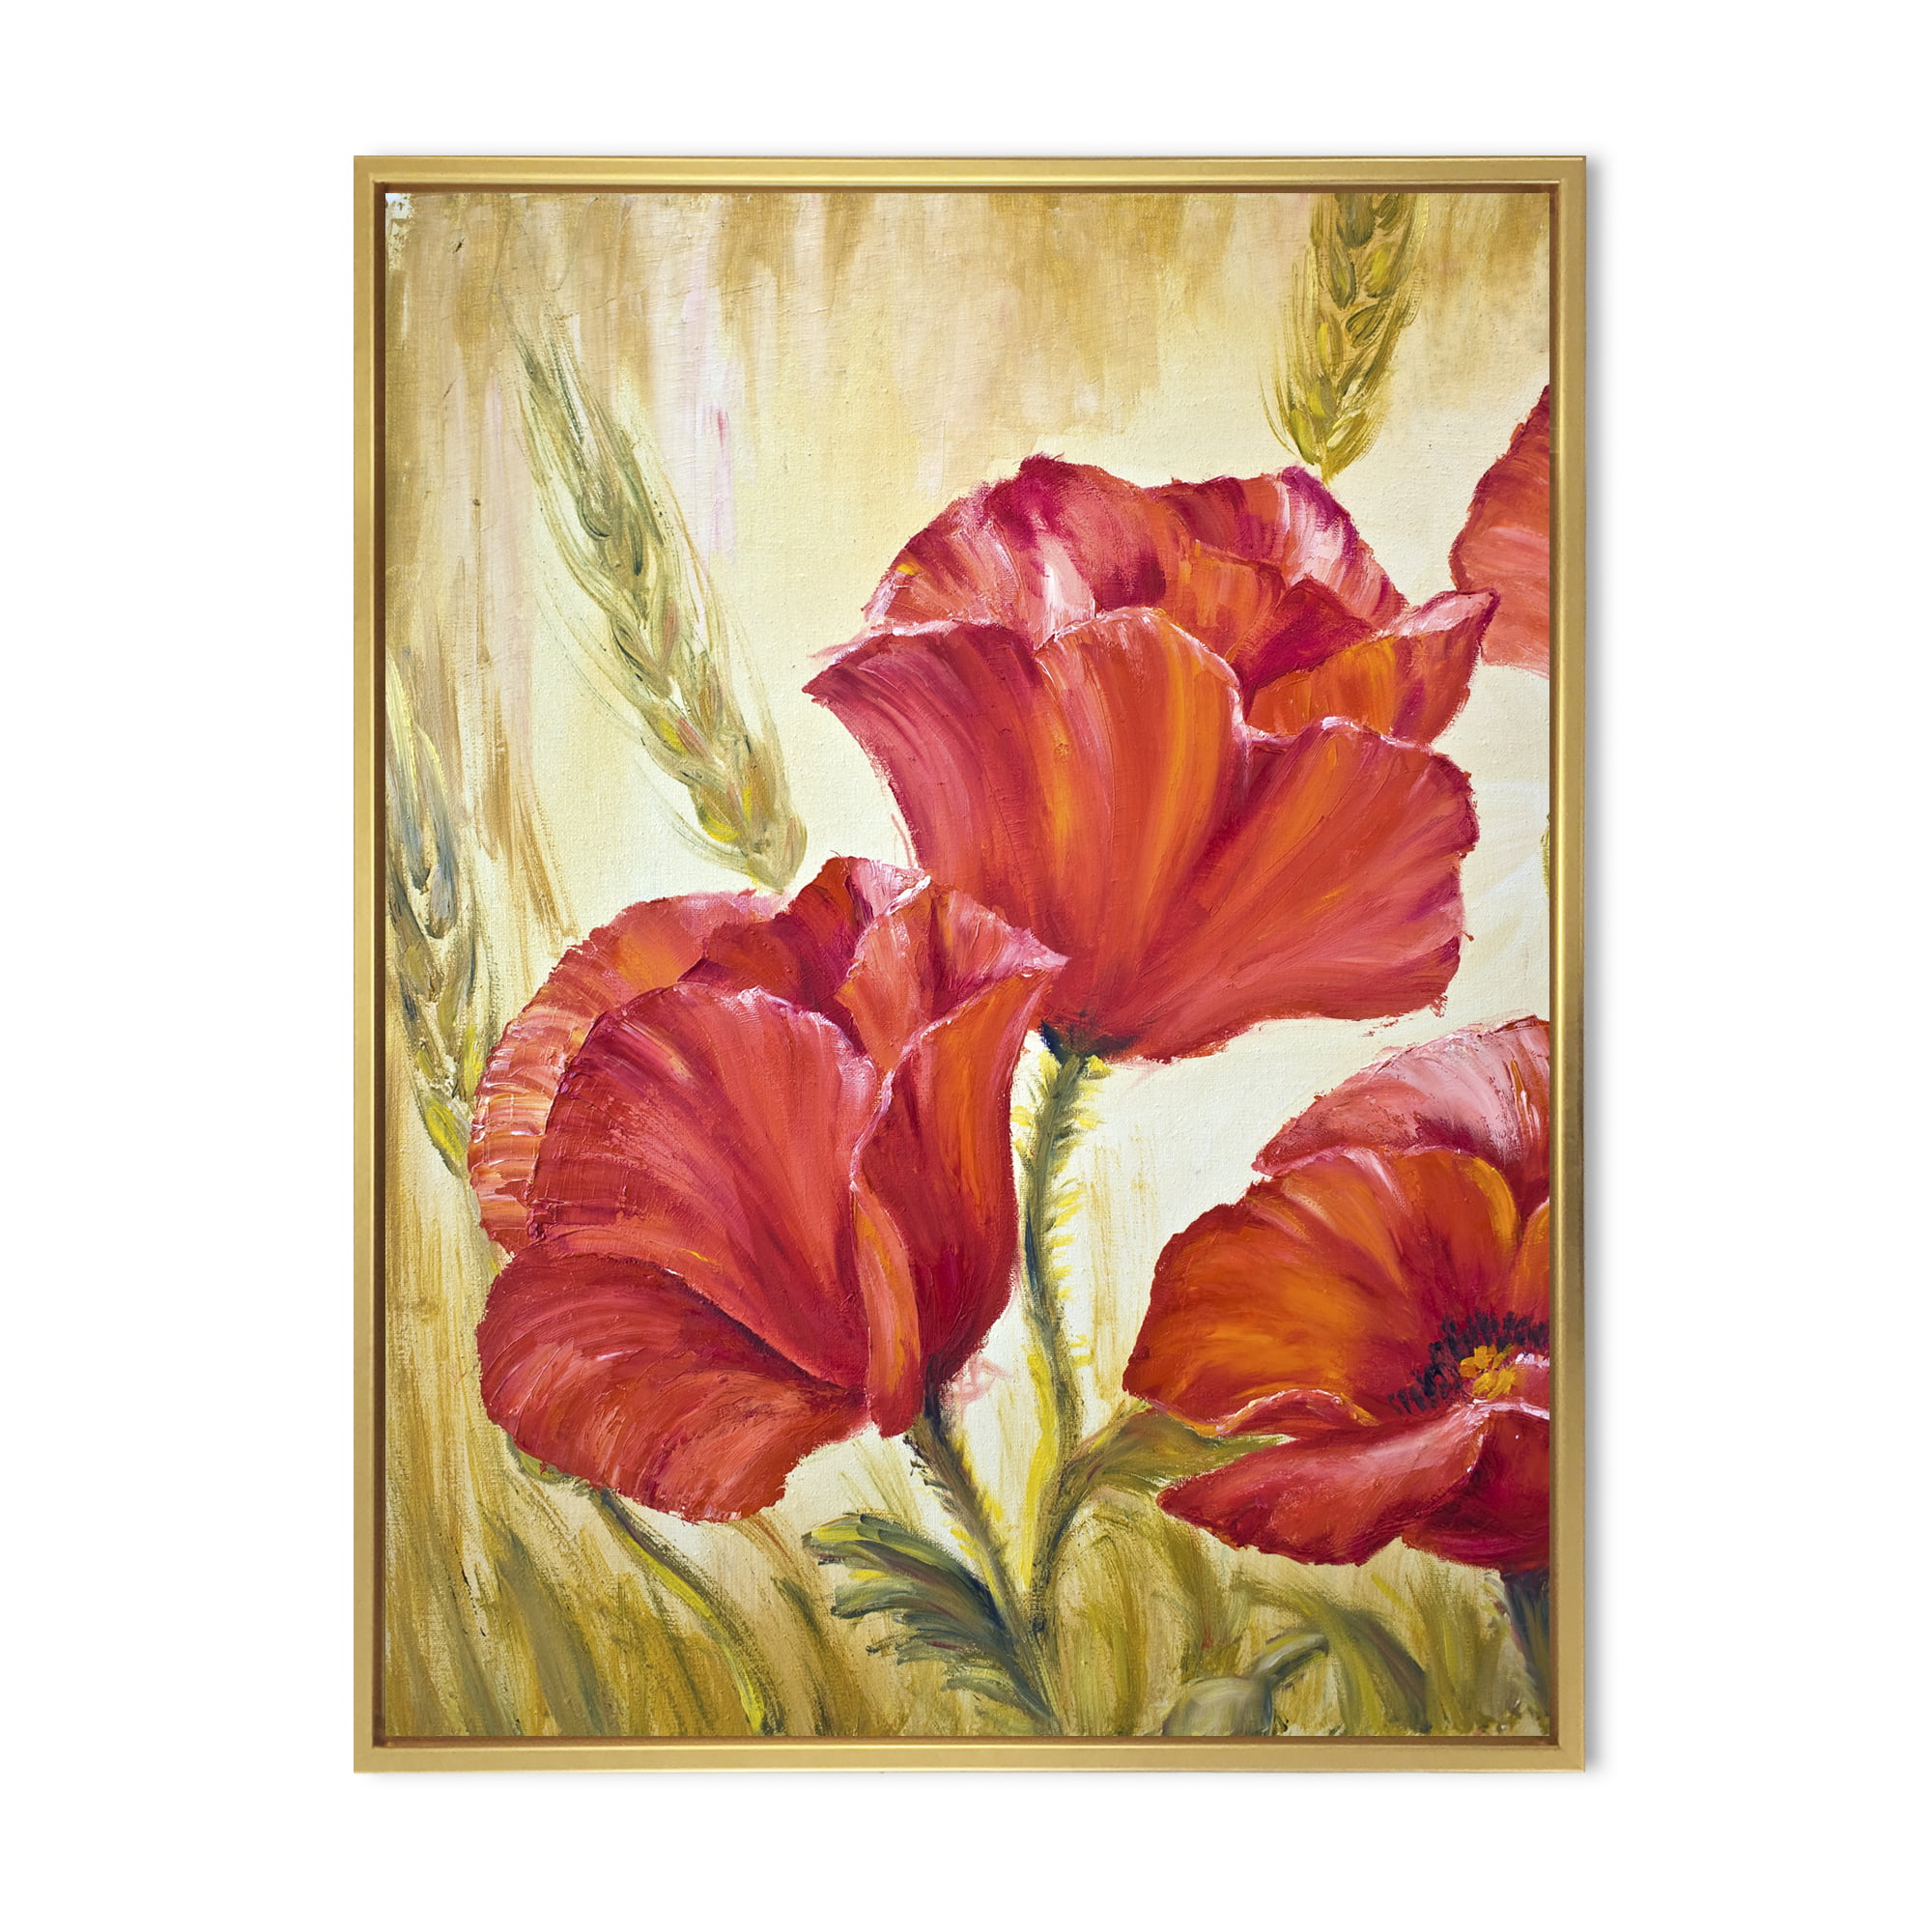 Poppies And Wheat Art Print Home Decor Wall Art Poster C 